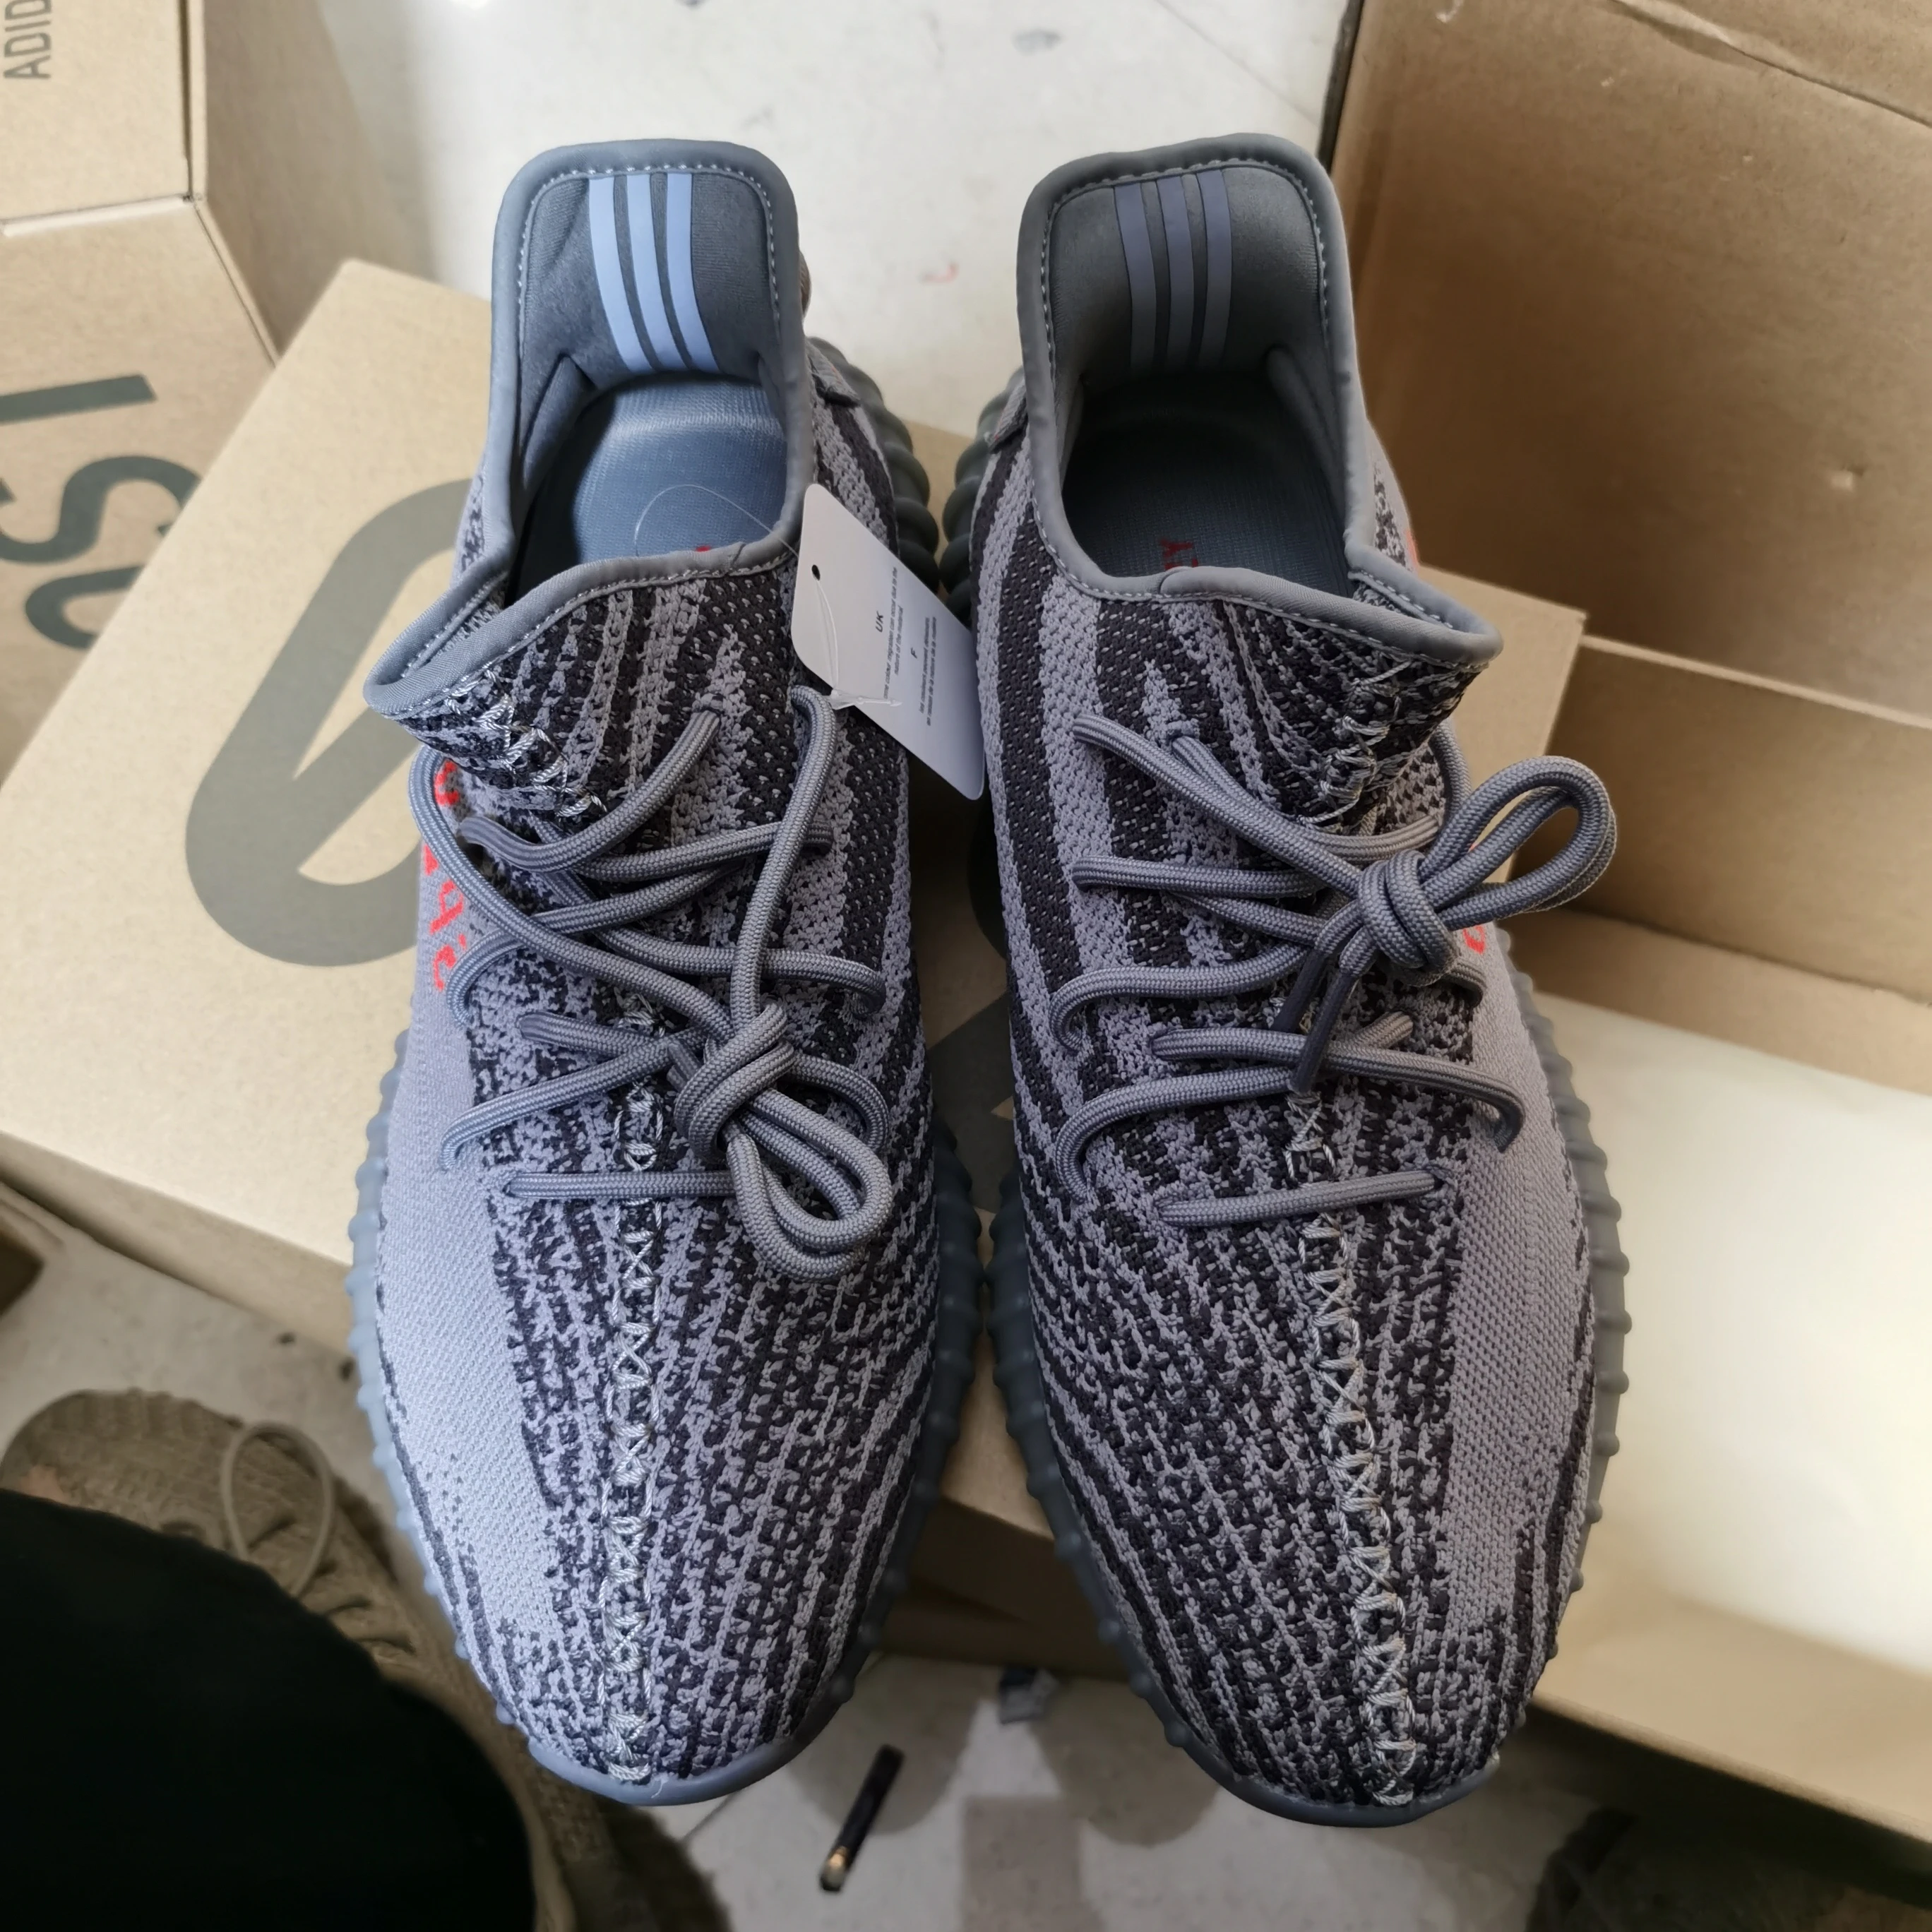 

ladies yeezy 350 V2 premium gray beluga 2.0 shoes yeeze 350 zebra grey fly knitting sports running sneakers for woman, 12pcs colors